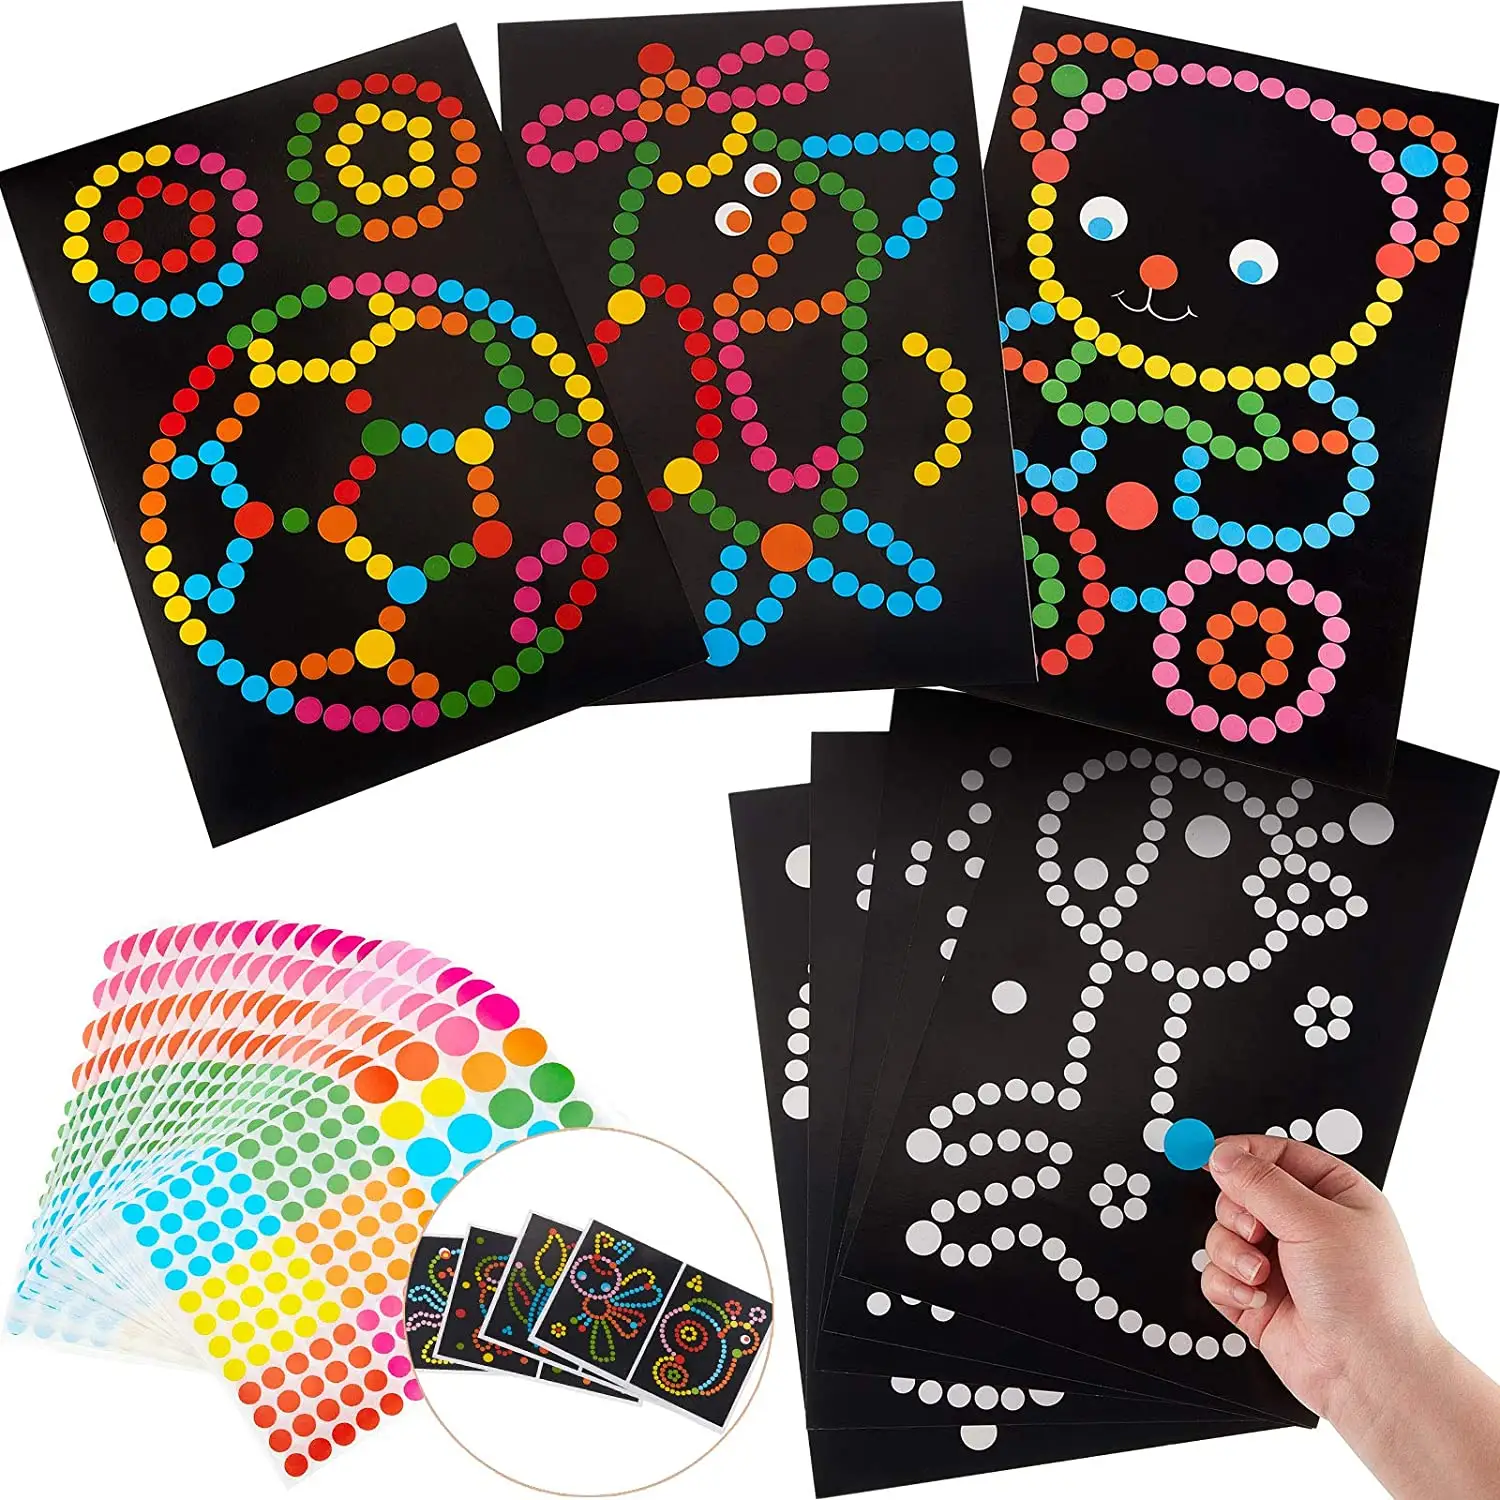 Dotty Sticker Picture Art Decoration Stickers Dot Stickers Assorted Colour Dotty Art Supplies for Kids School Arts and Crafts